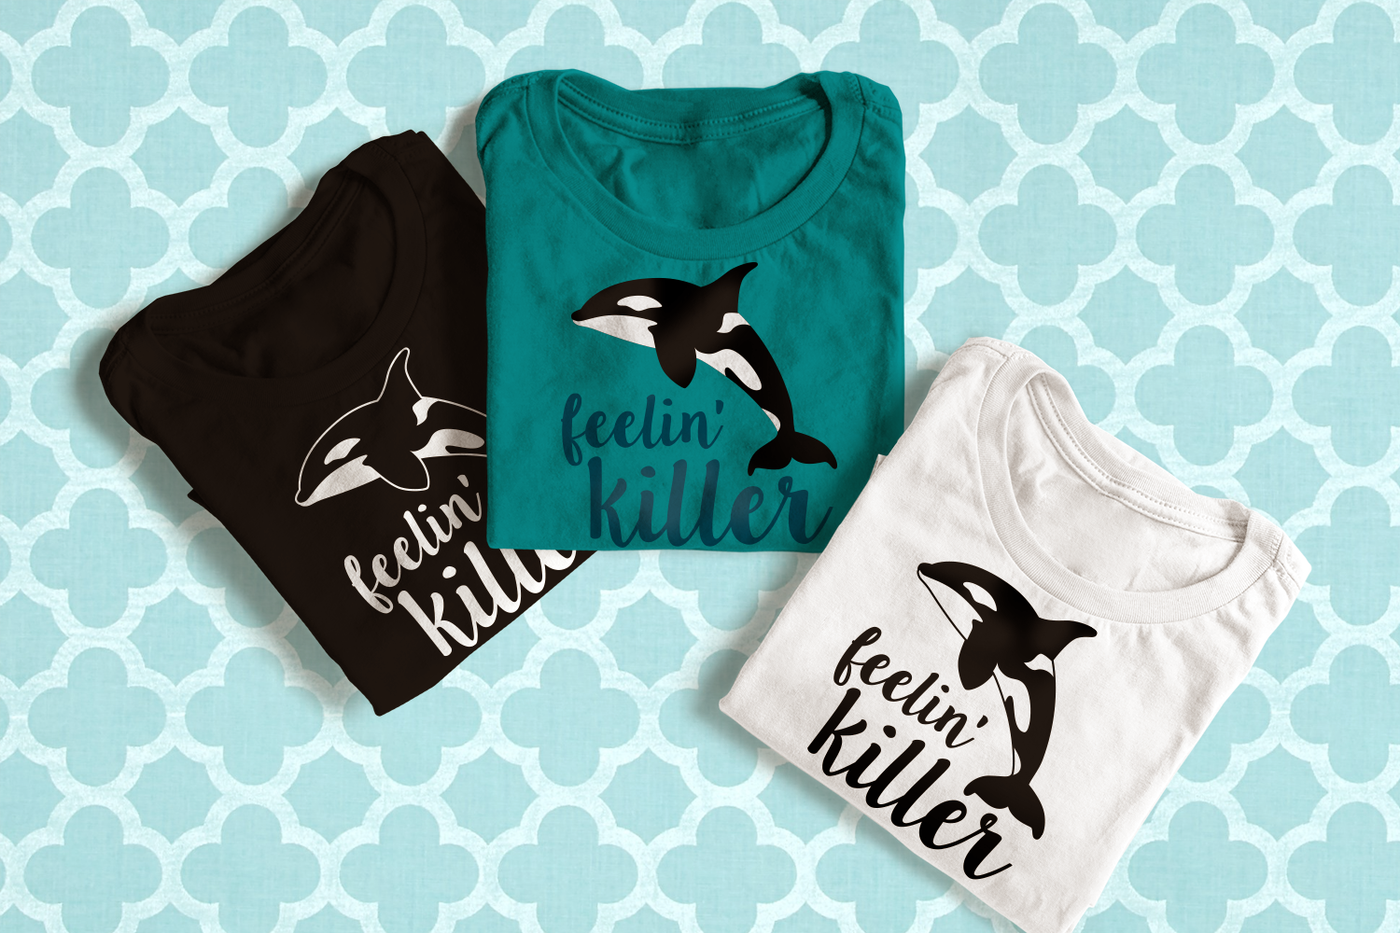 Three folded tees. Each has the image of a killer whale and text that says "feelin' killer."